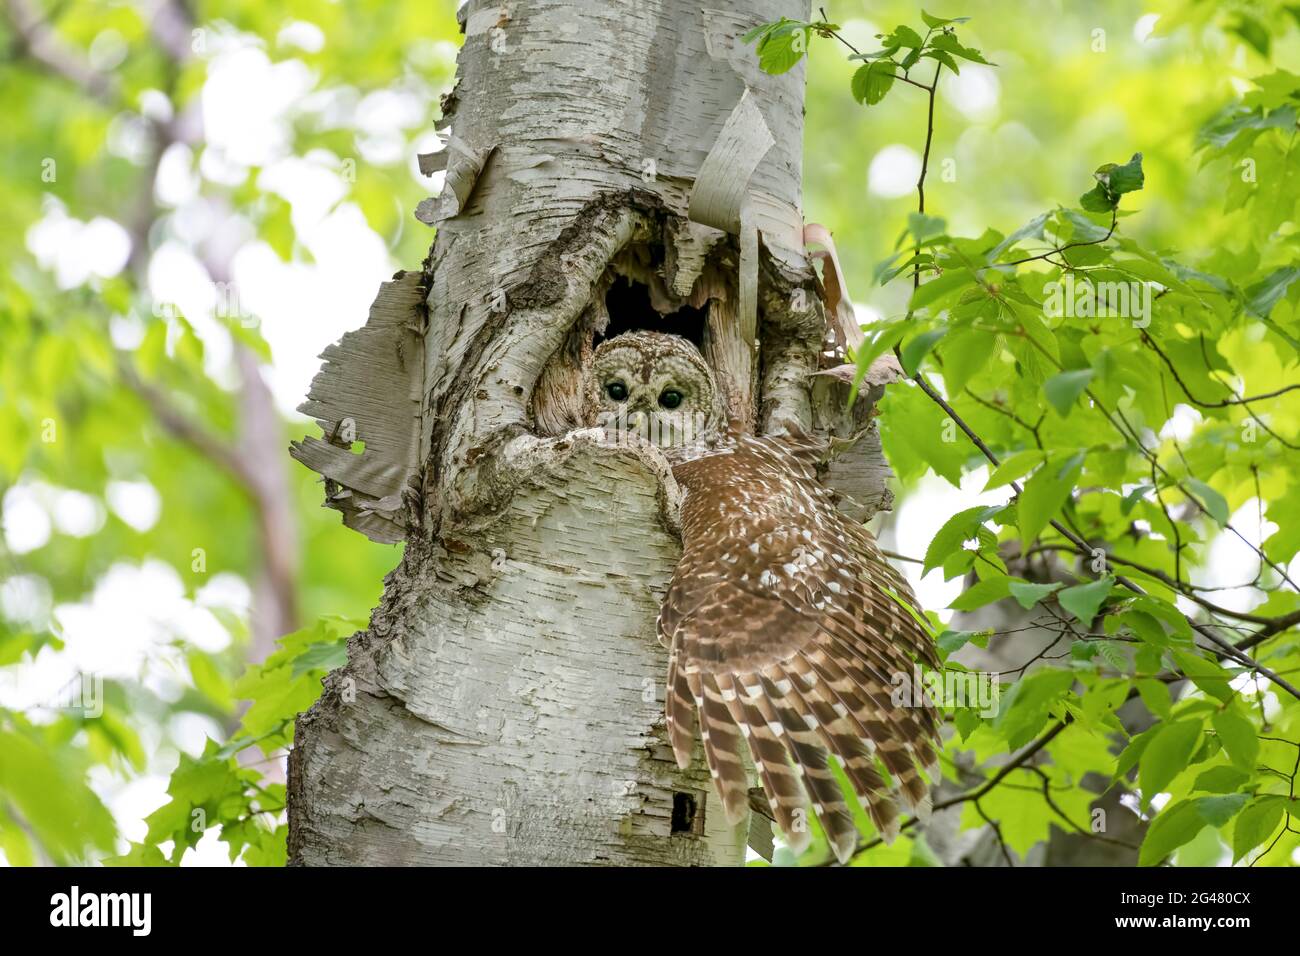 Barred owl in her nest inside a tree, looking out with one large wing stretched out of the nest. Her two owlets are underneath her in the tree cavity. Stock Photo